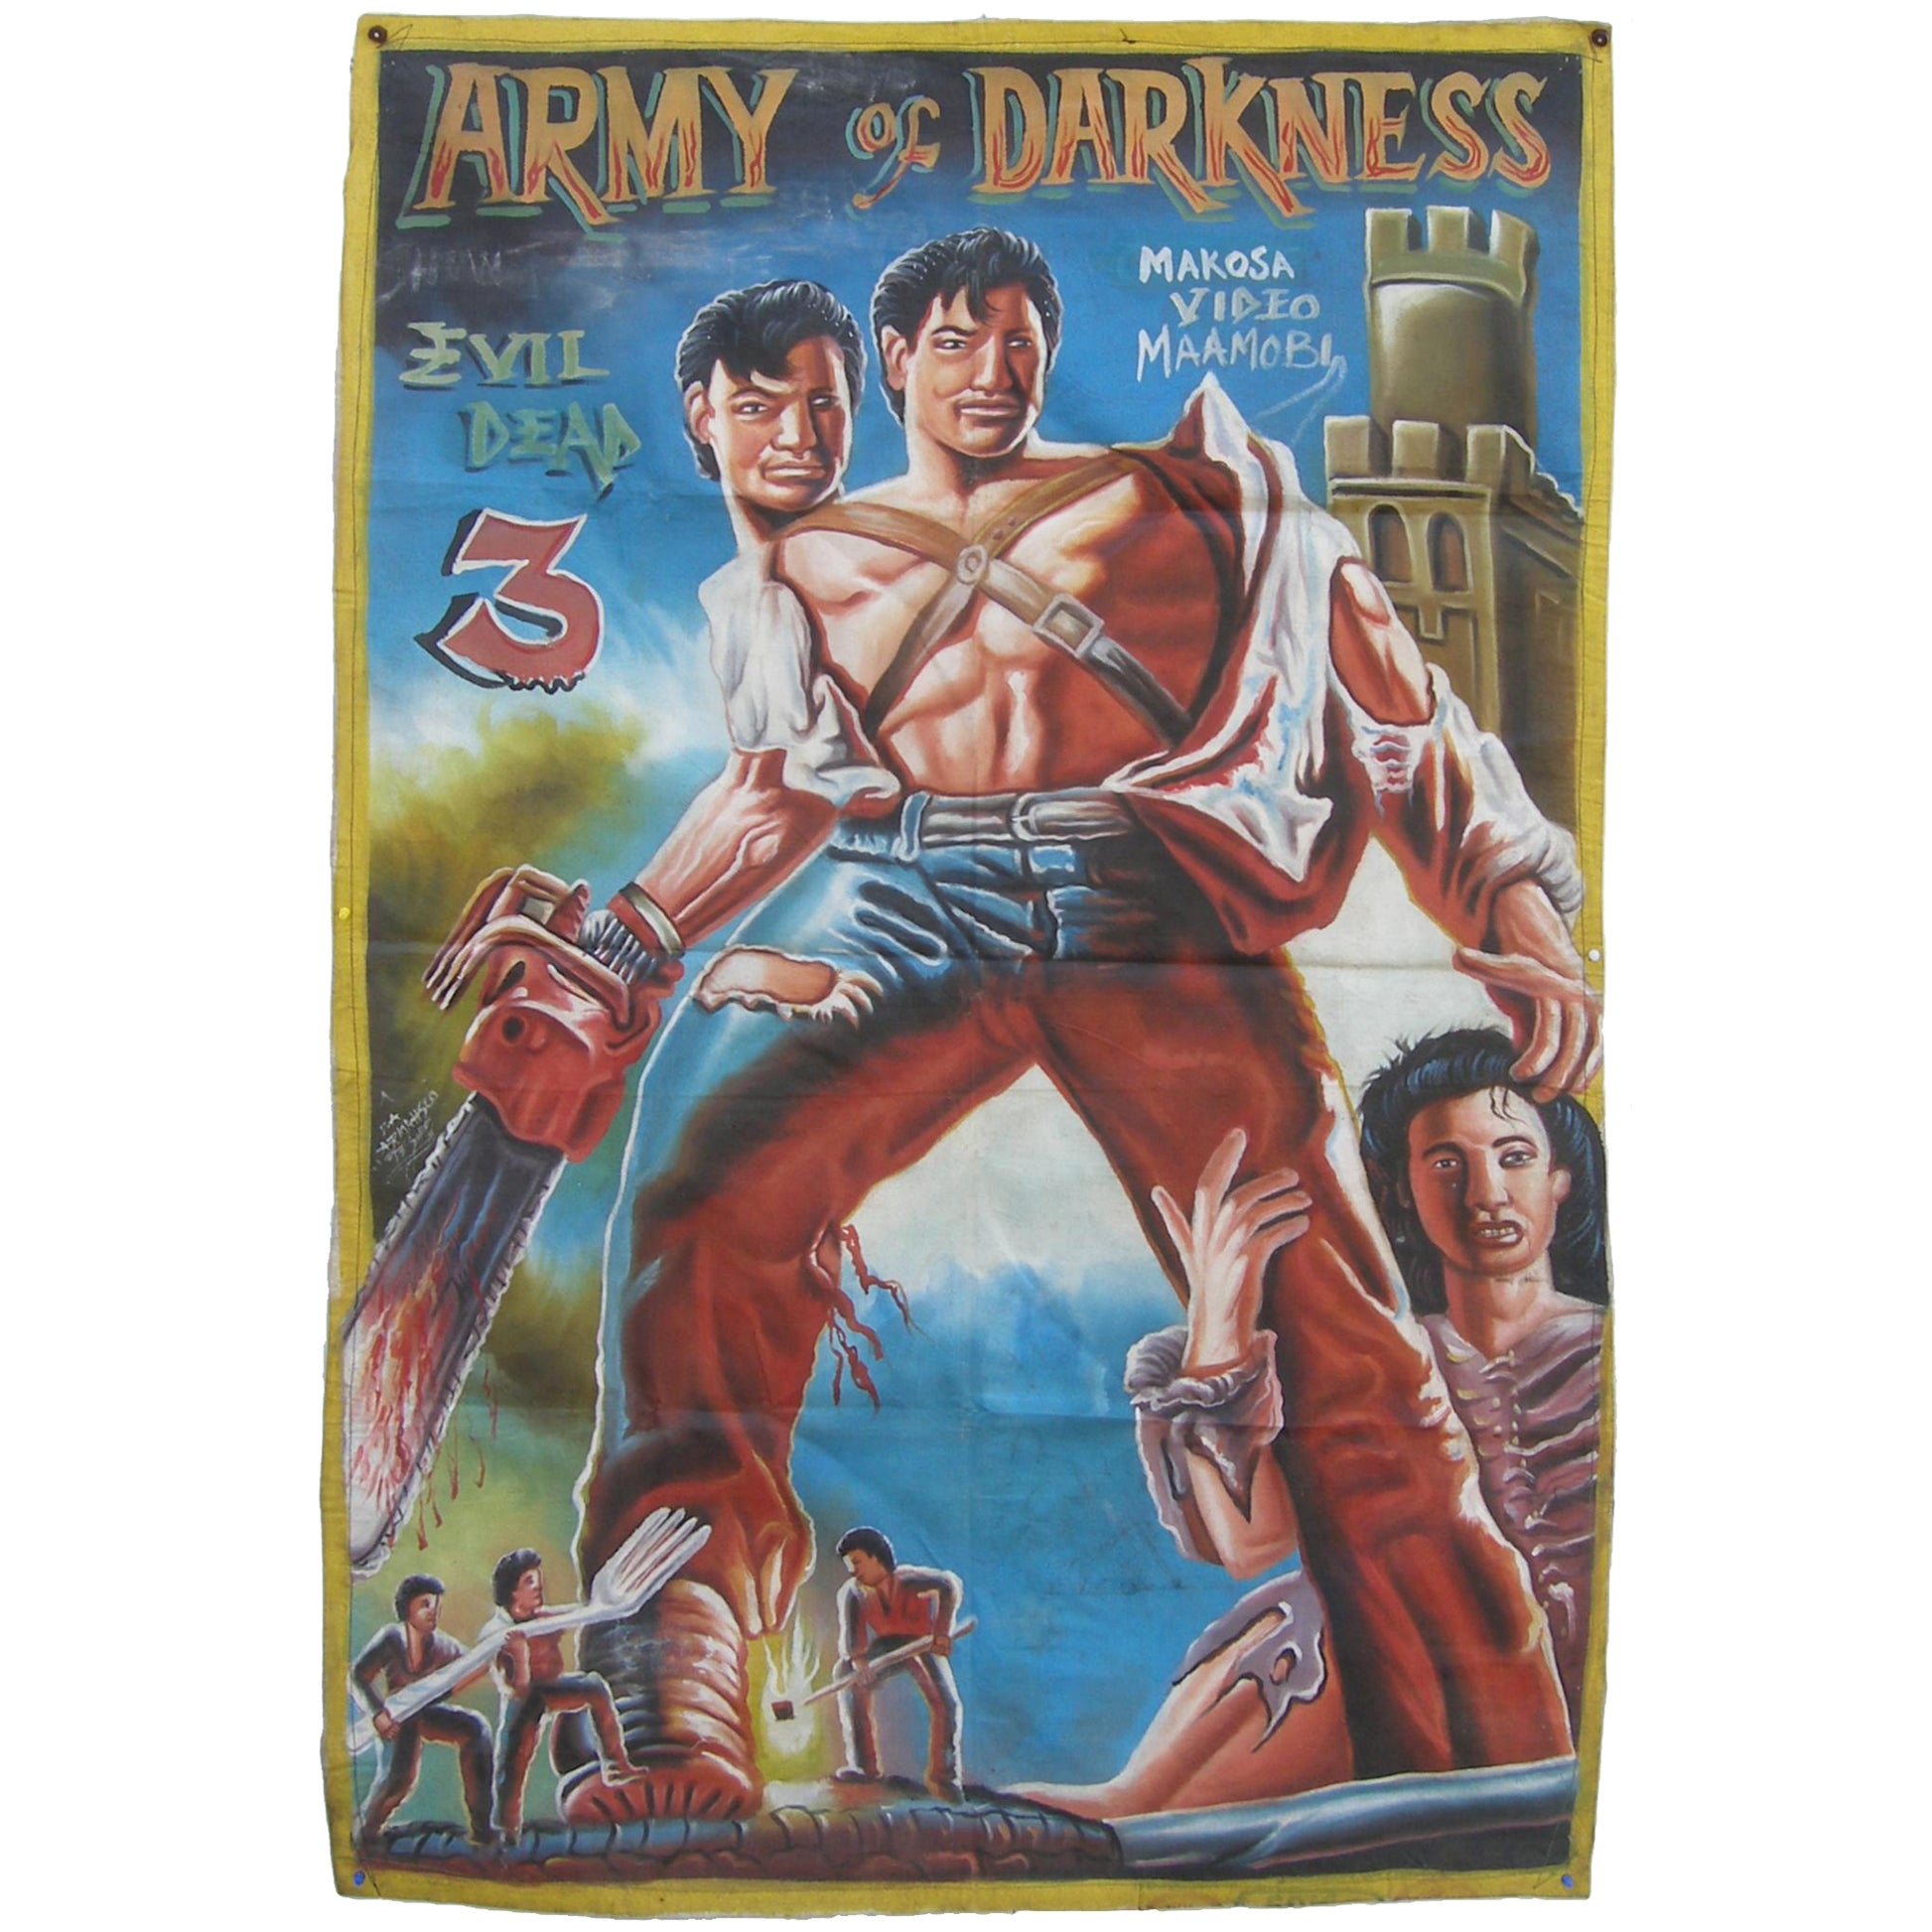 ARMY OF DARKNESS EVIL DEAD 3 MOVIE POSTER HAND PAINTED IN GHANA